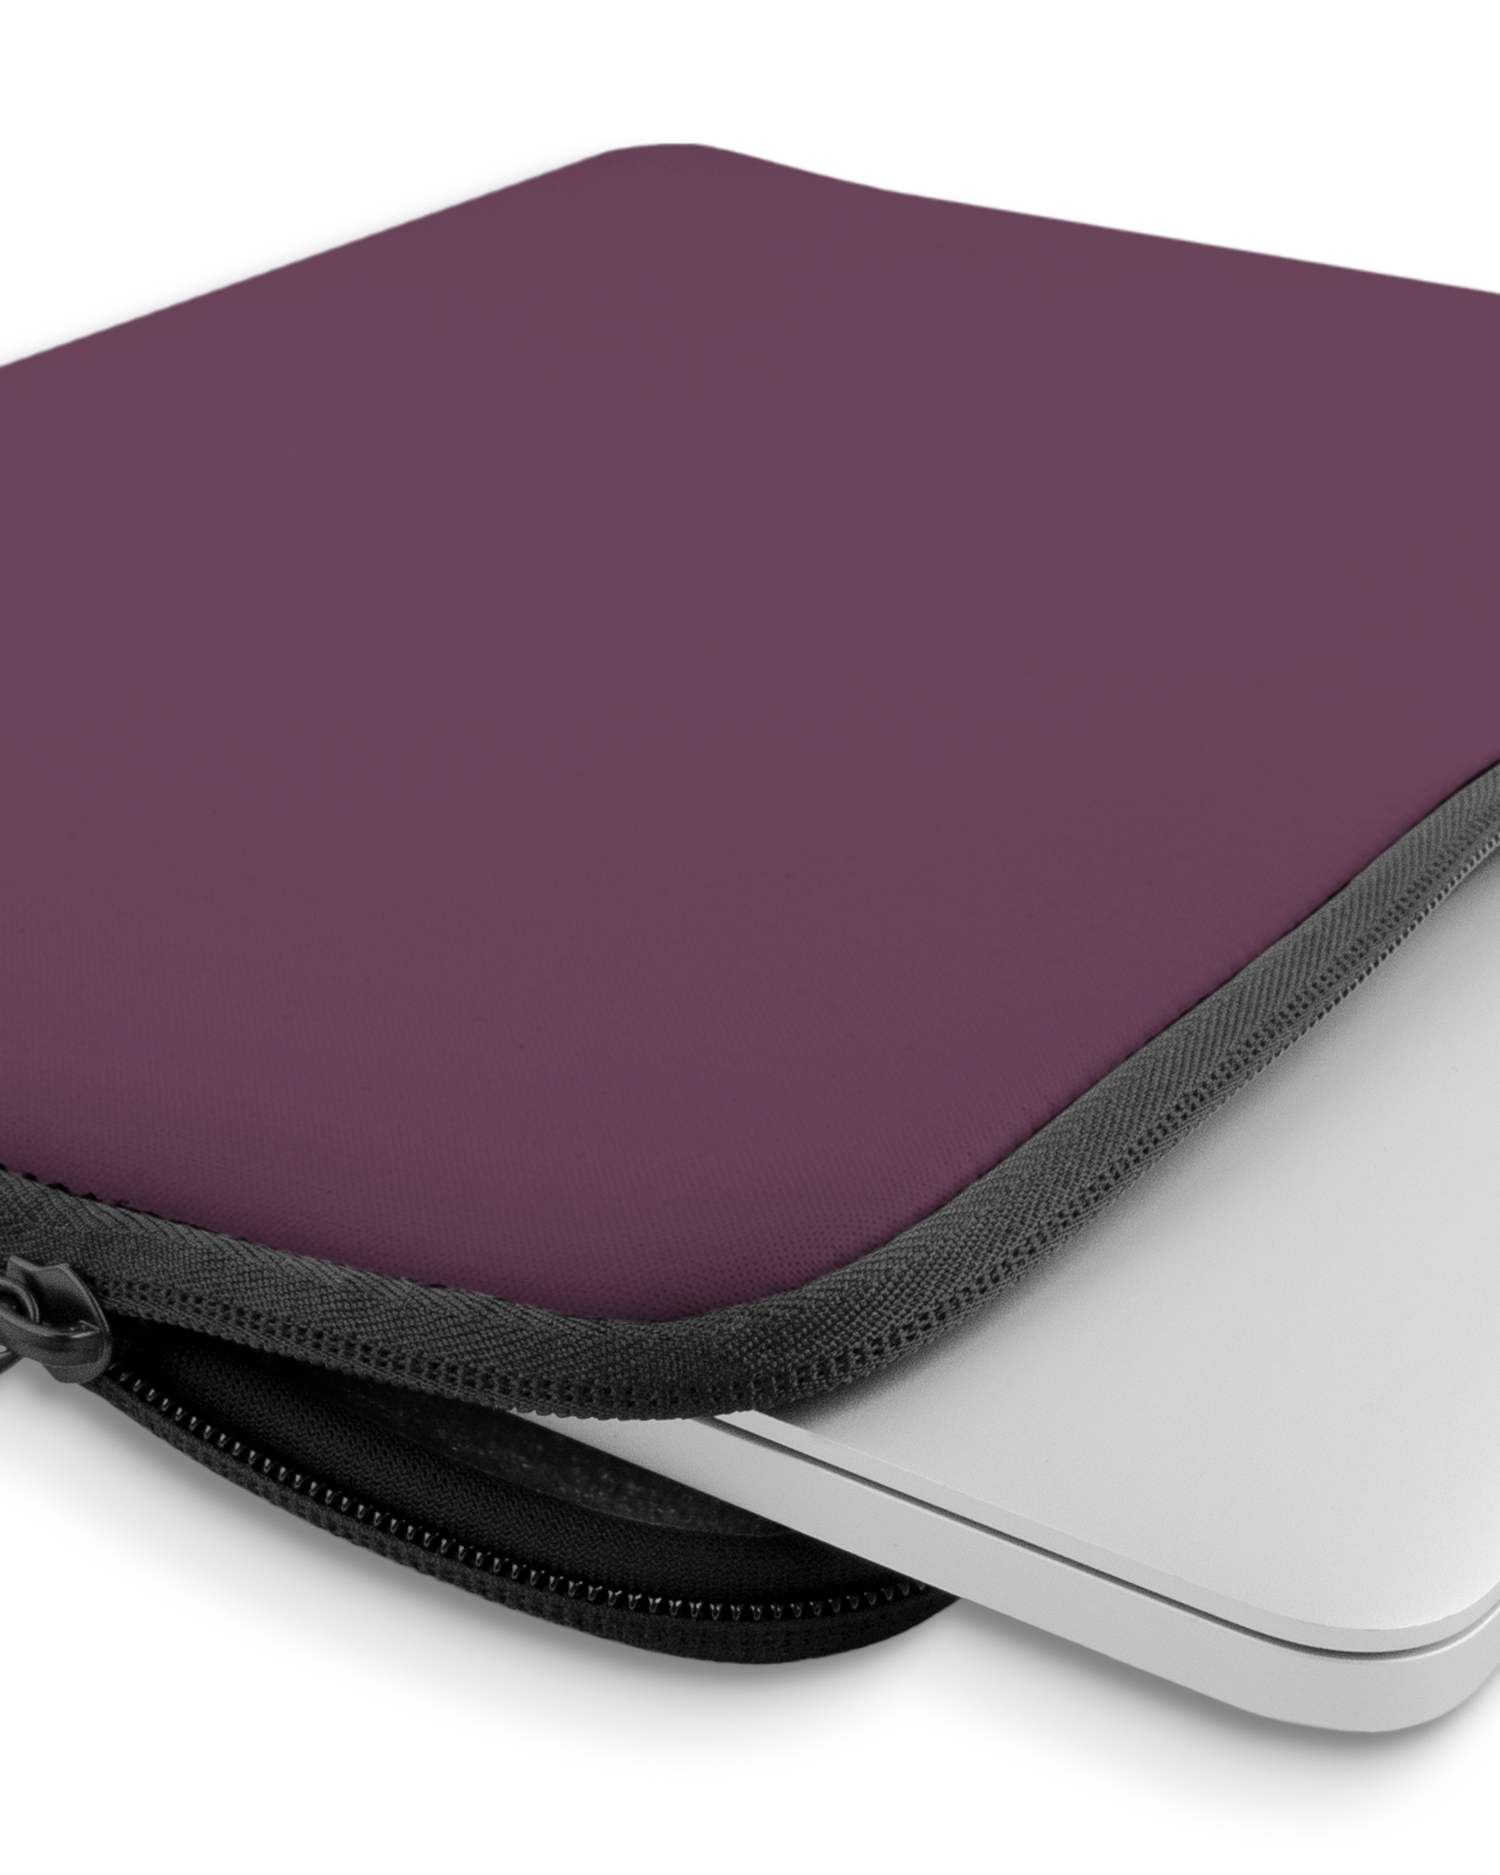 PLUM Laptop Case 13-14 inch with device inside